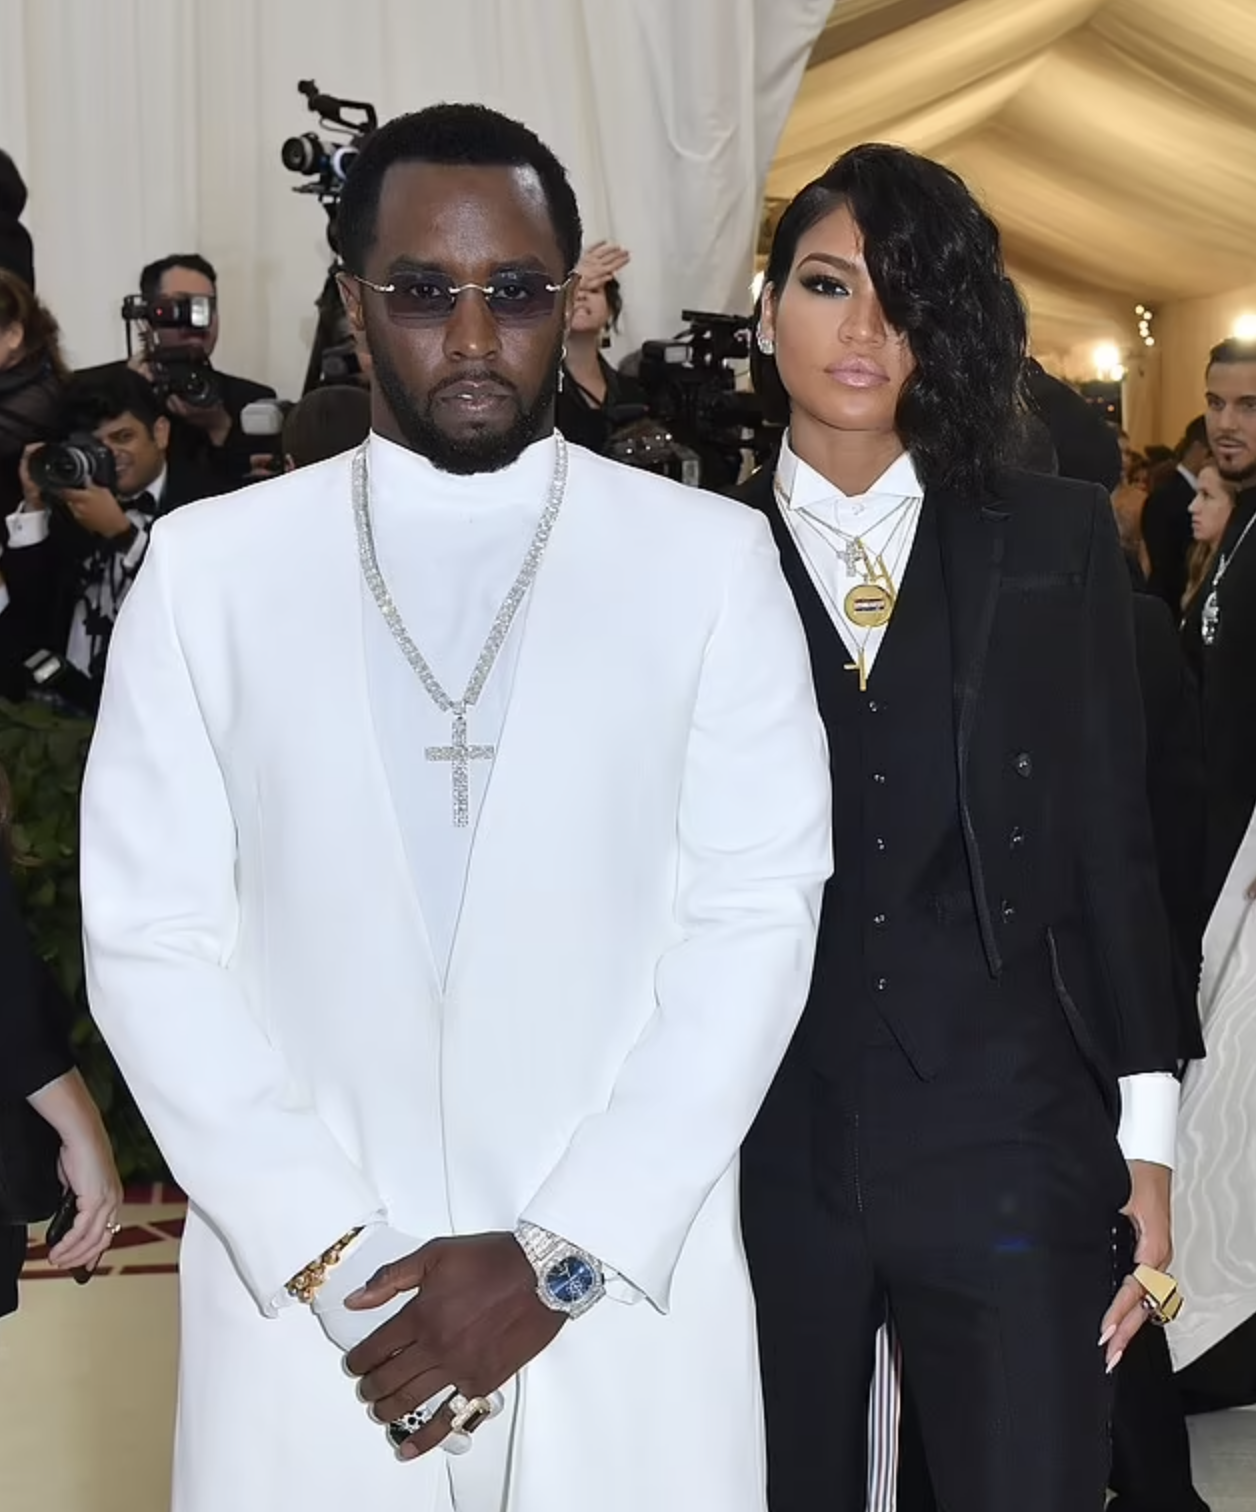 Accuser in Diddy Sexual Assault Case Allegedly Retains Unwashed Clothes from 2003 Incident in Sealed Bag, Lawsuit Reveals.